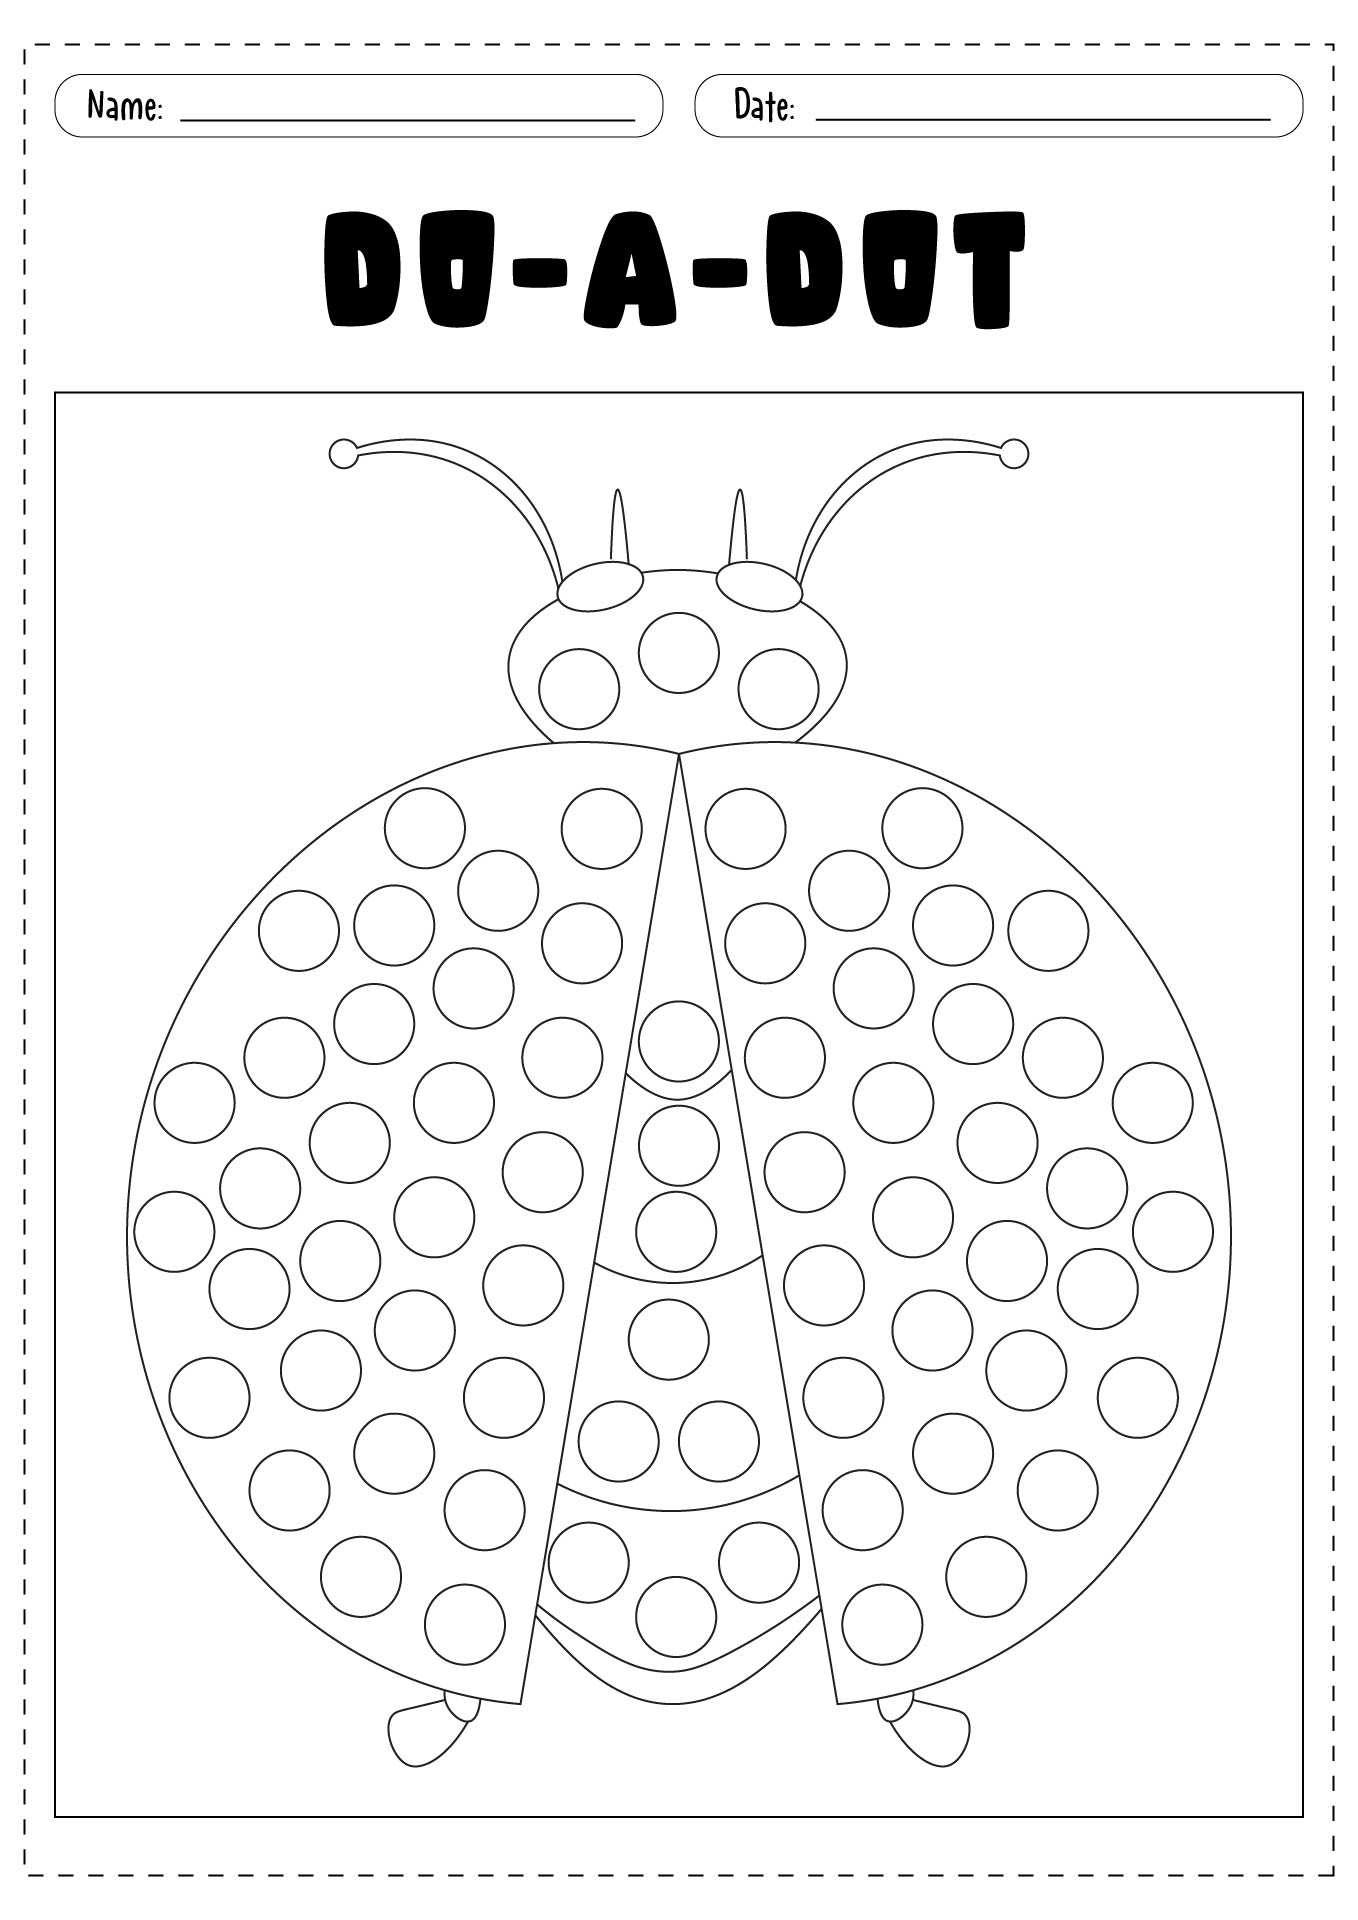 9-connect-the-dots-worksheets-for-grade-1-worksheeto